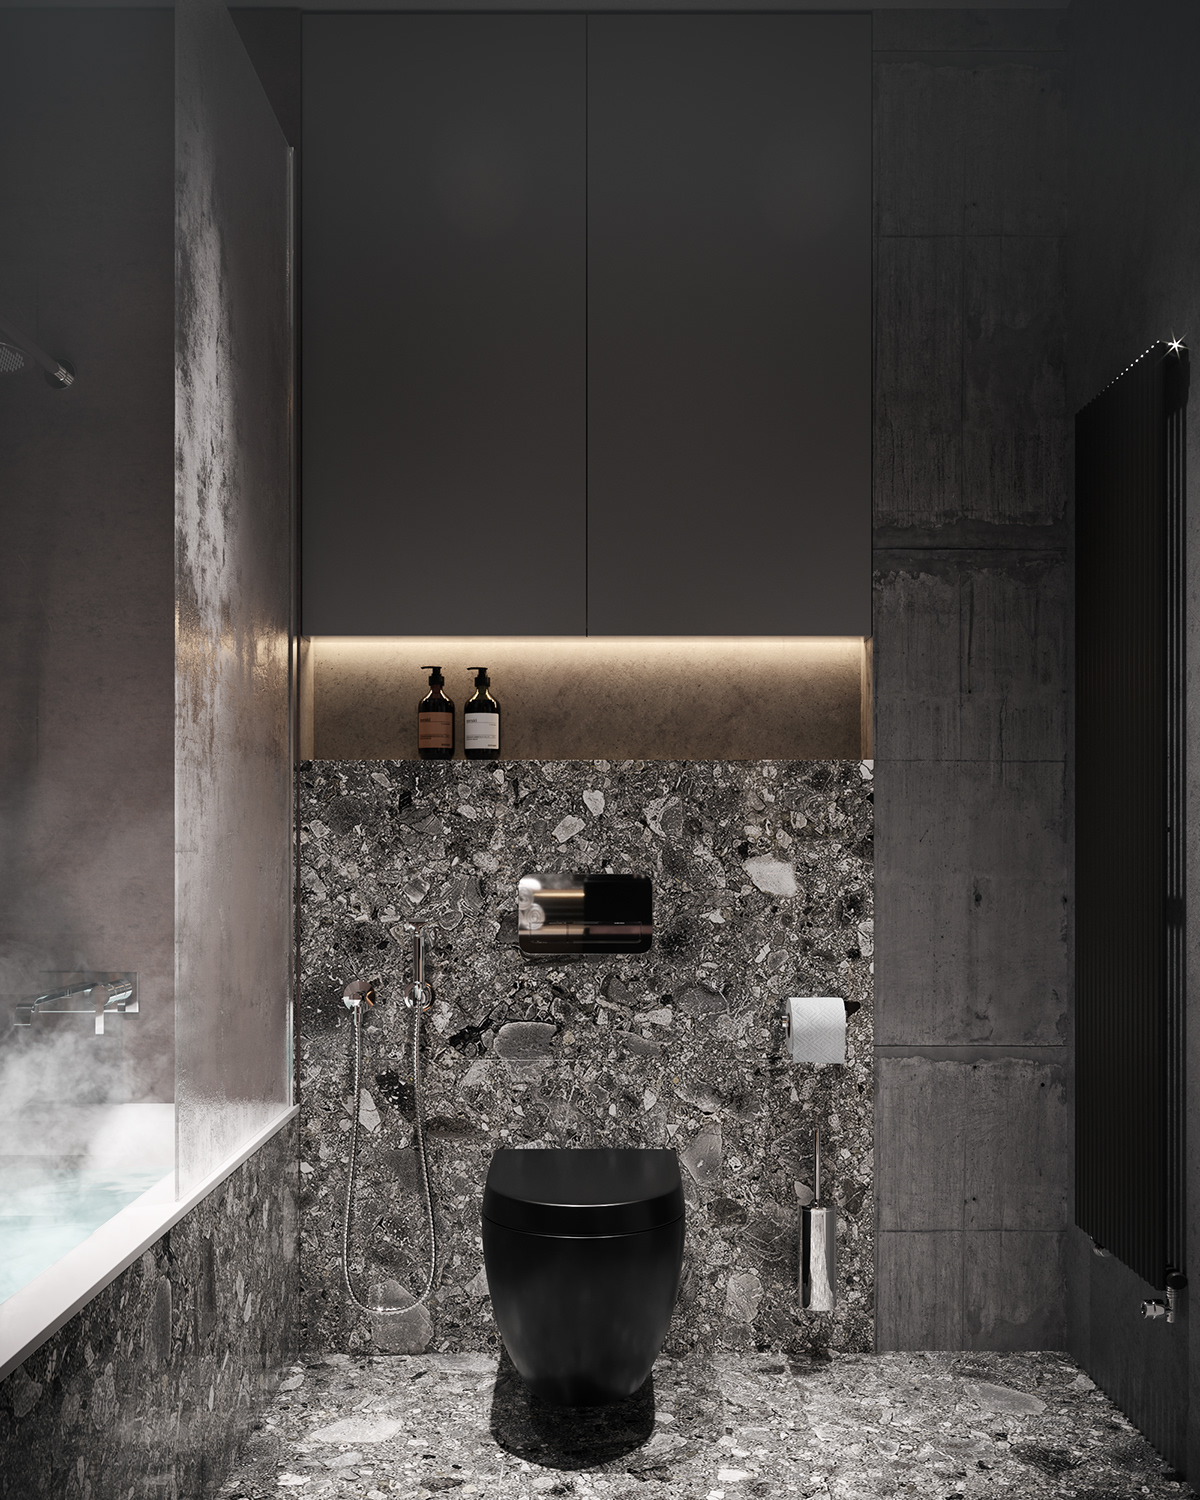 Stone in the bathroom is popular as it can help with good waterproofing.